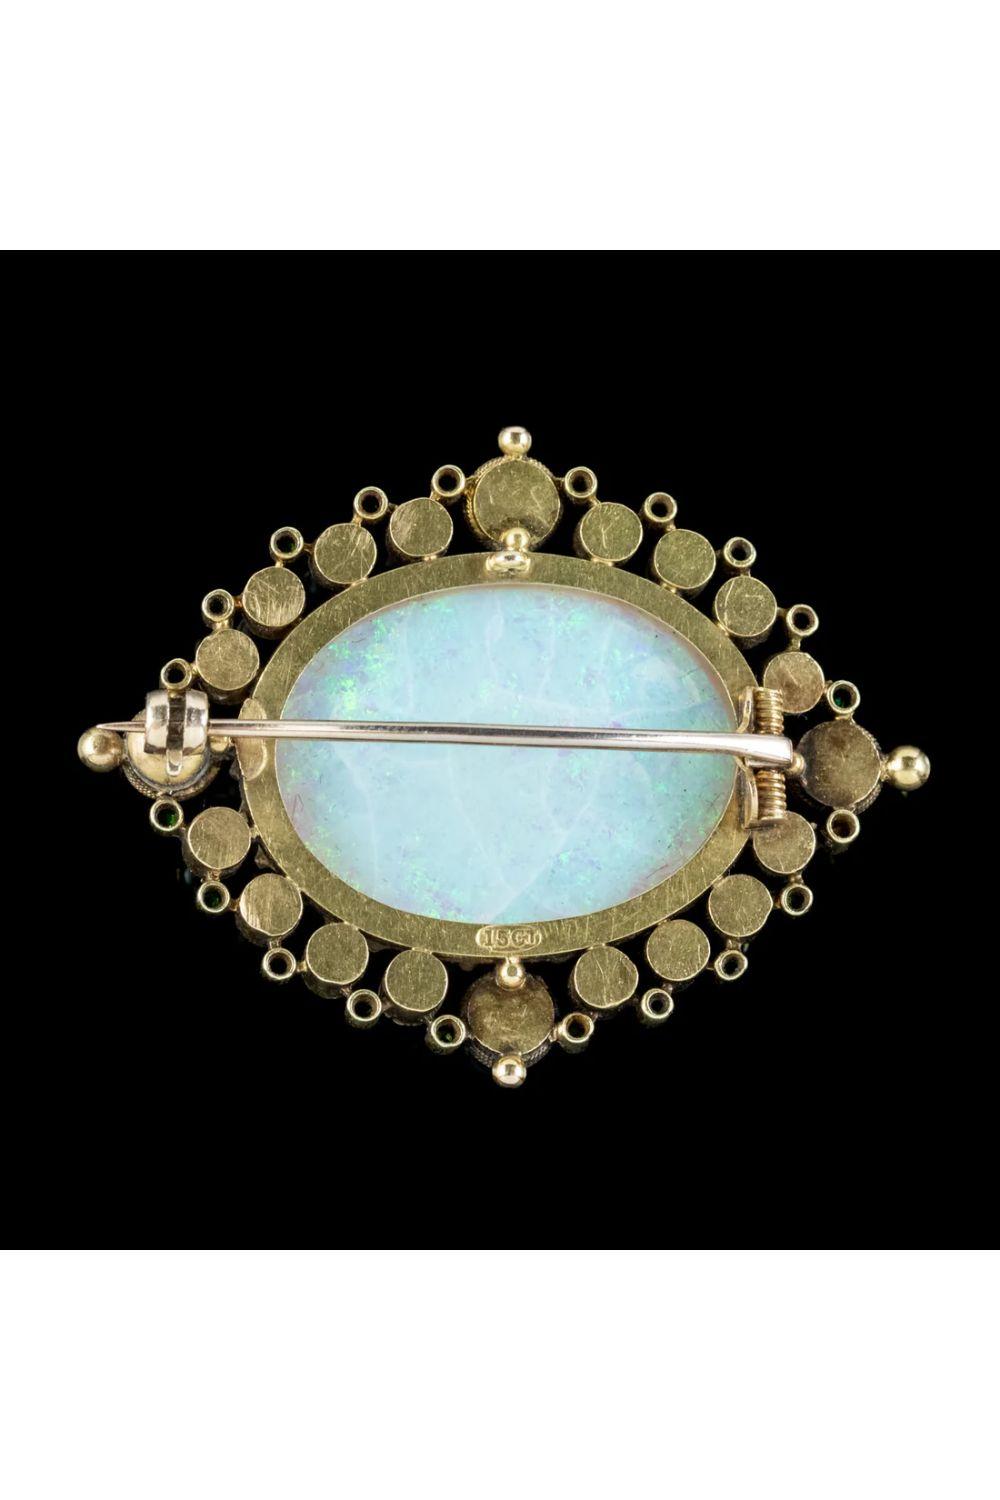 A magnificent antique late Victorian brooch claw set with an enormous natural opal cabochon in the centre, weighing an impressive 25 carats (approx.) It’s haloed by eighteen bright pearls and an array of rich green garnets that chase around the